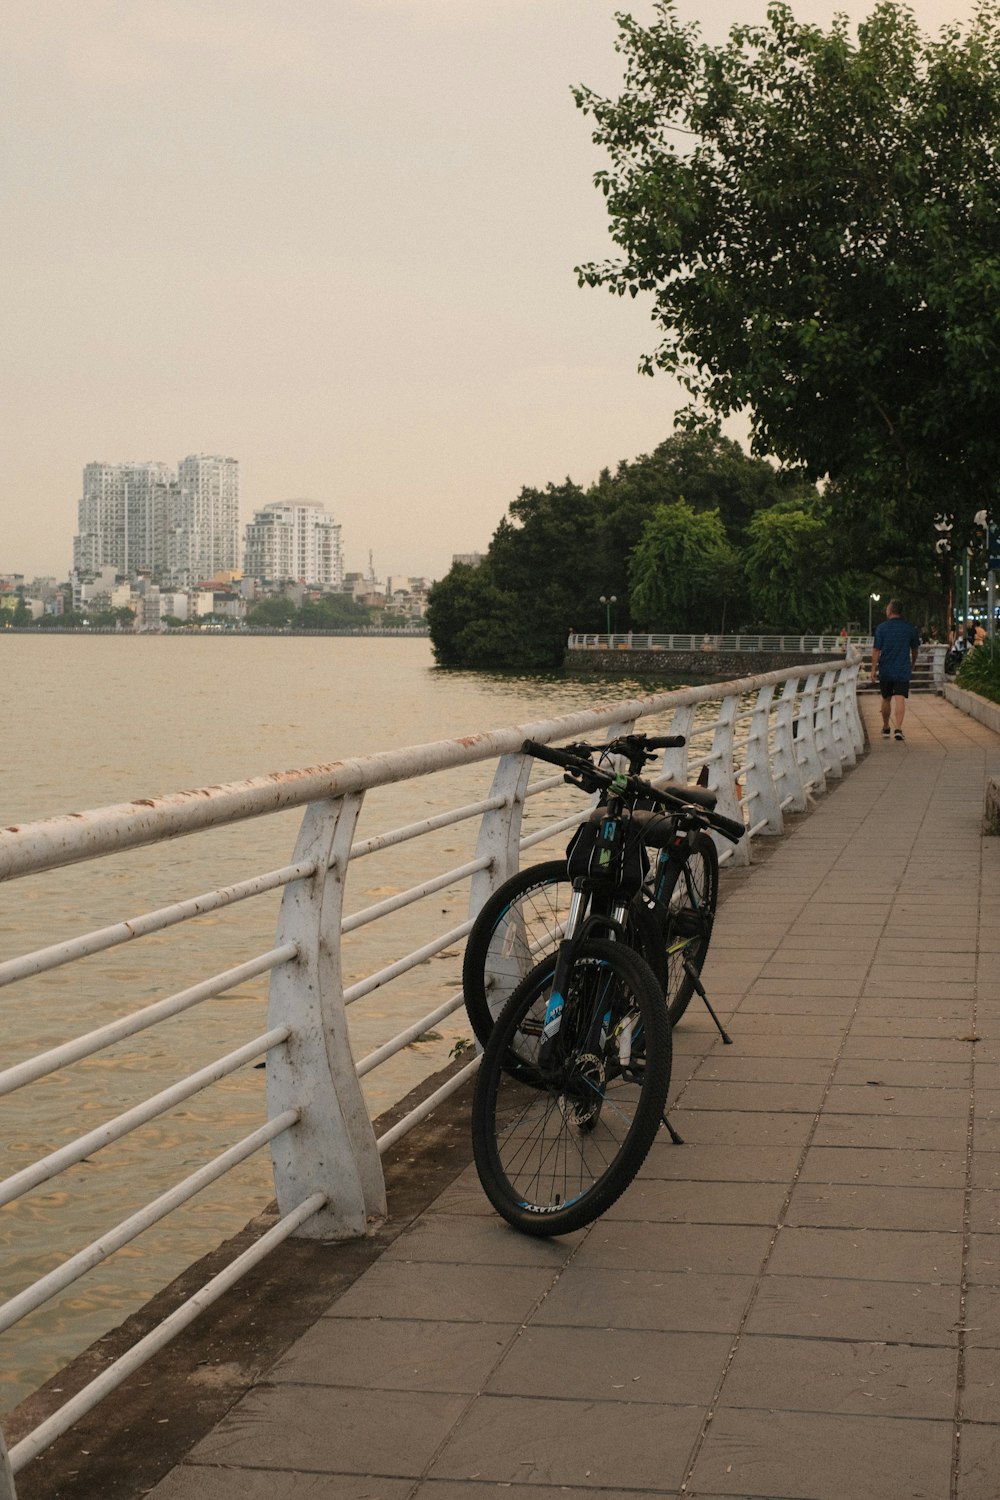 a bicycle parked on a bridge next to a body of water